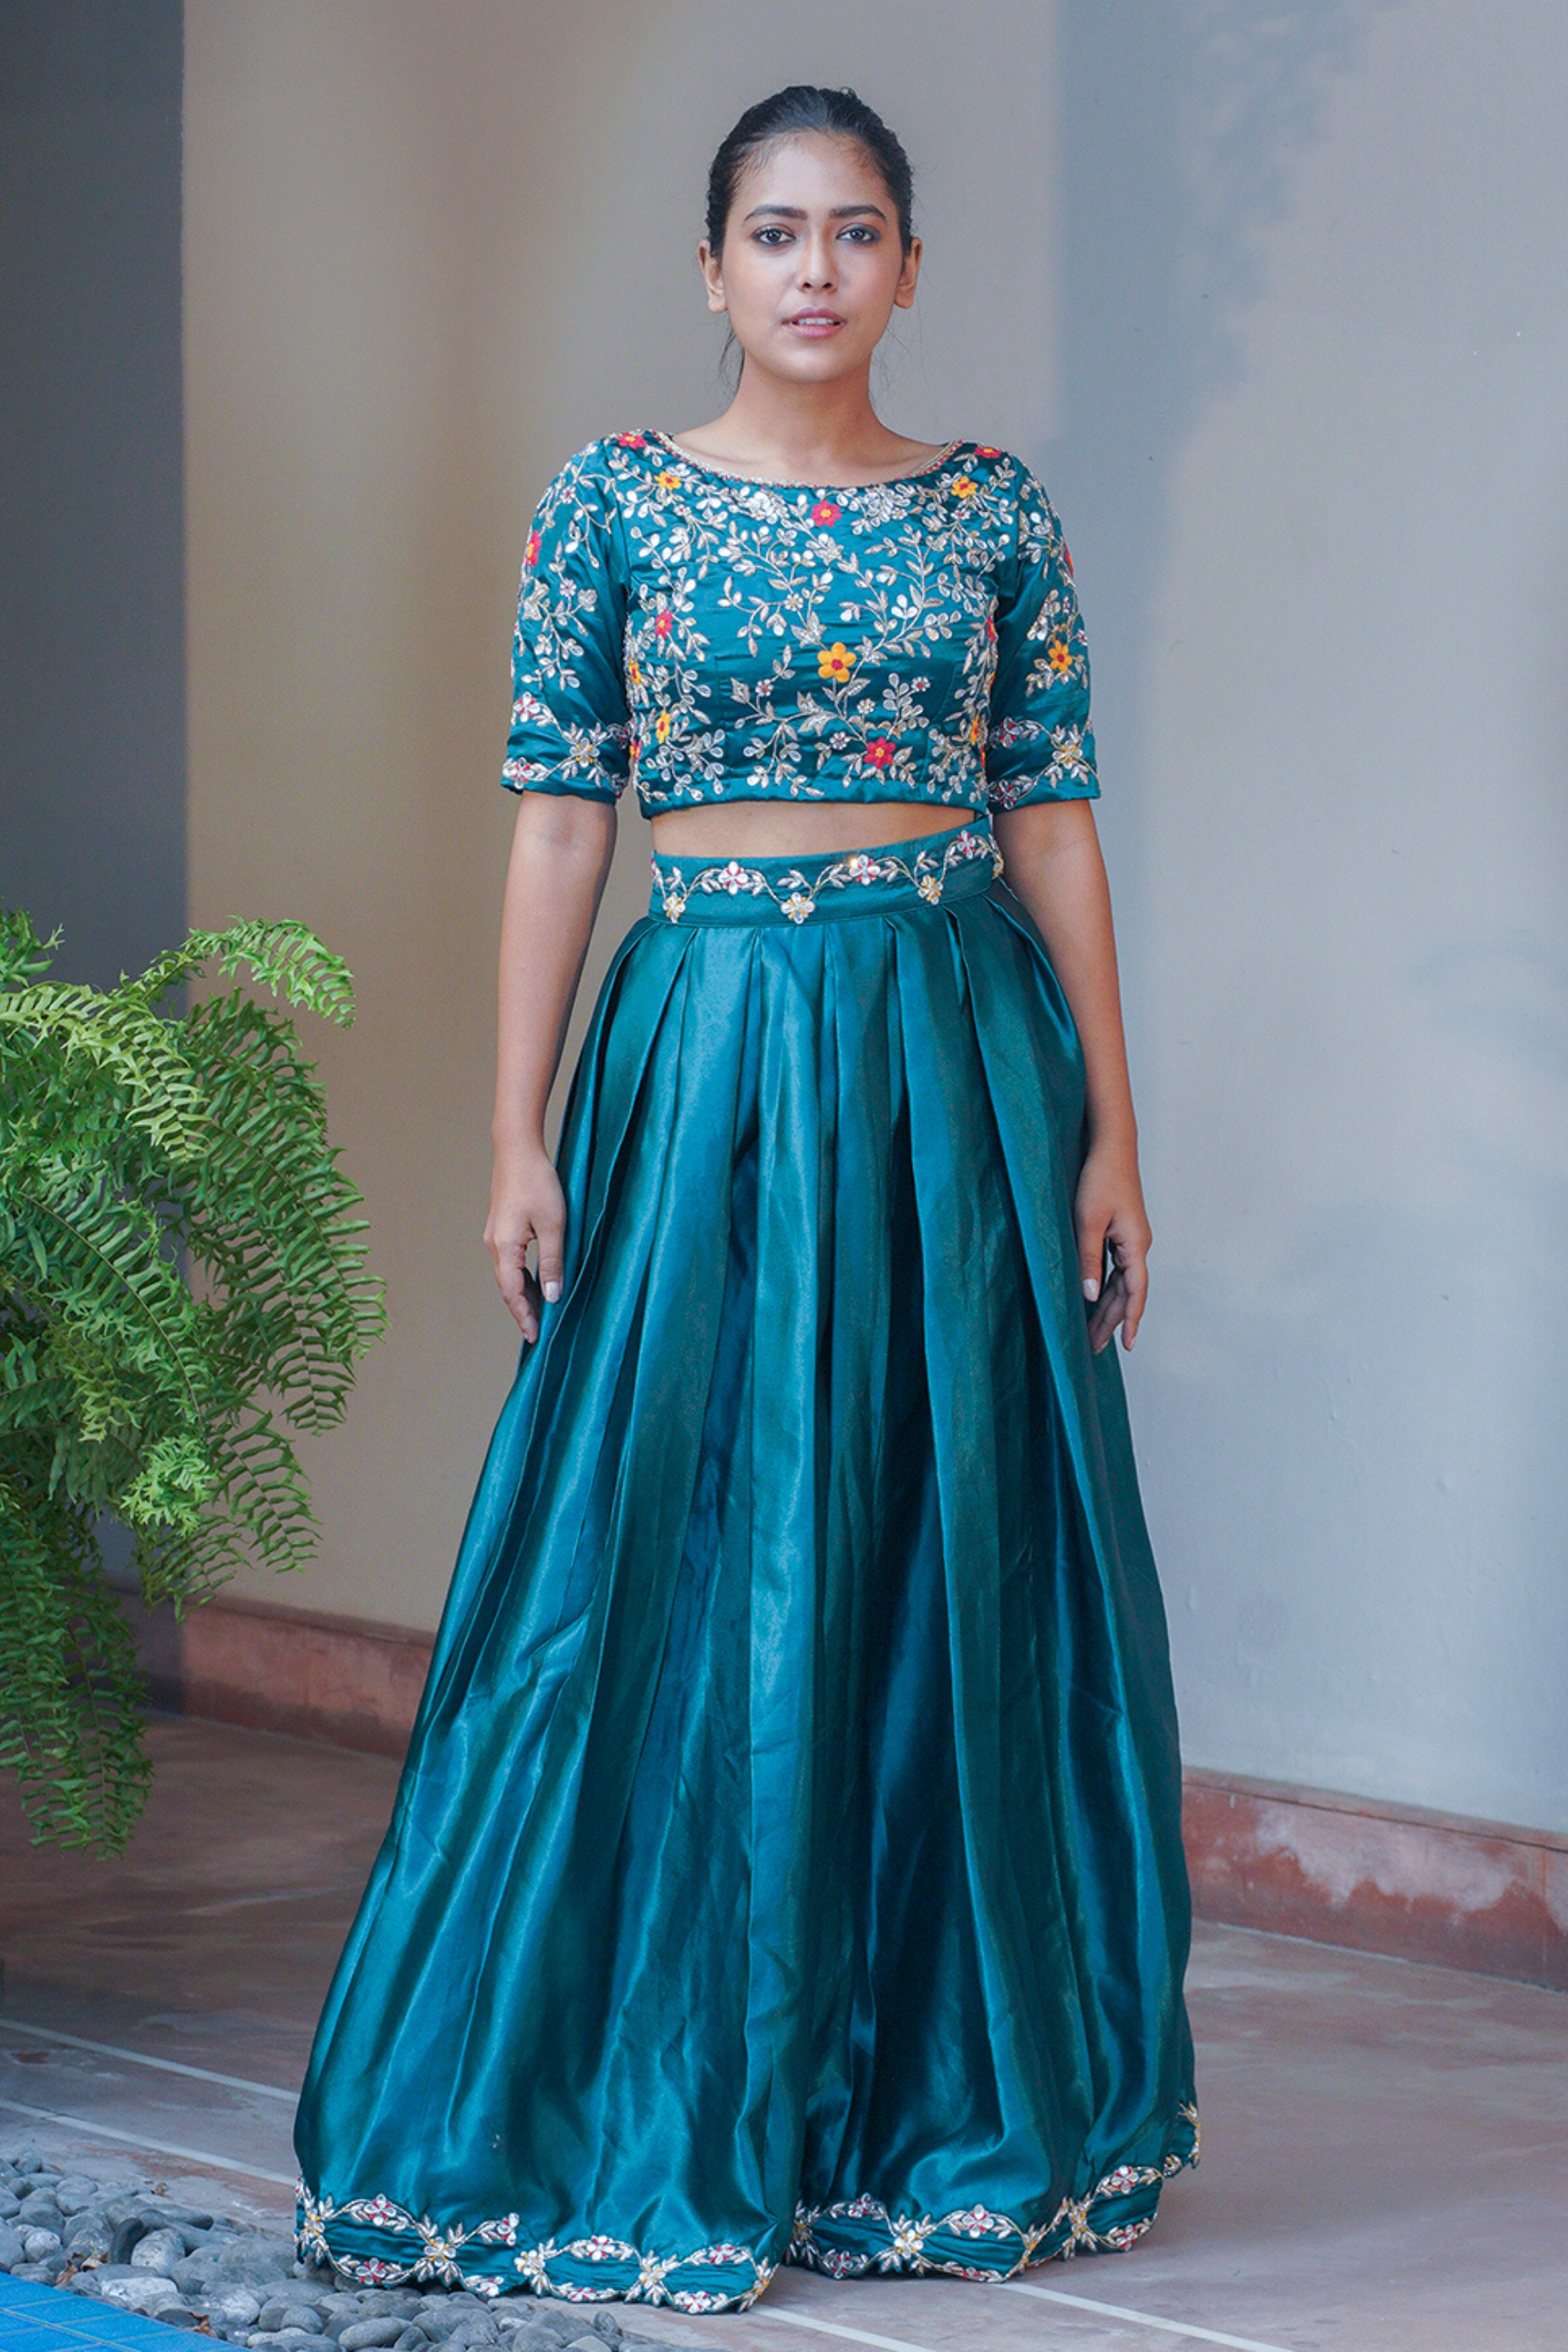 teal blue satin lehenga and blouse with silver hand embroidered gotawork.